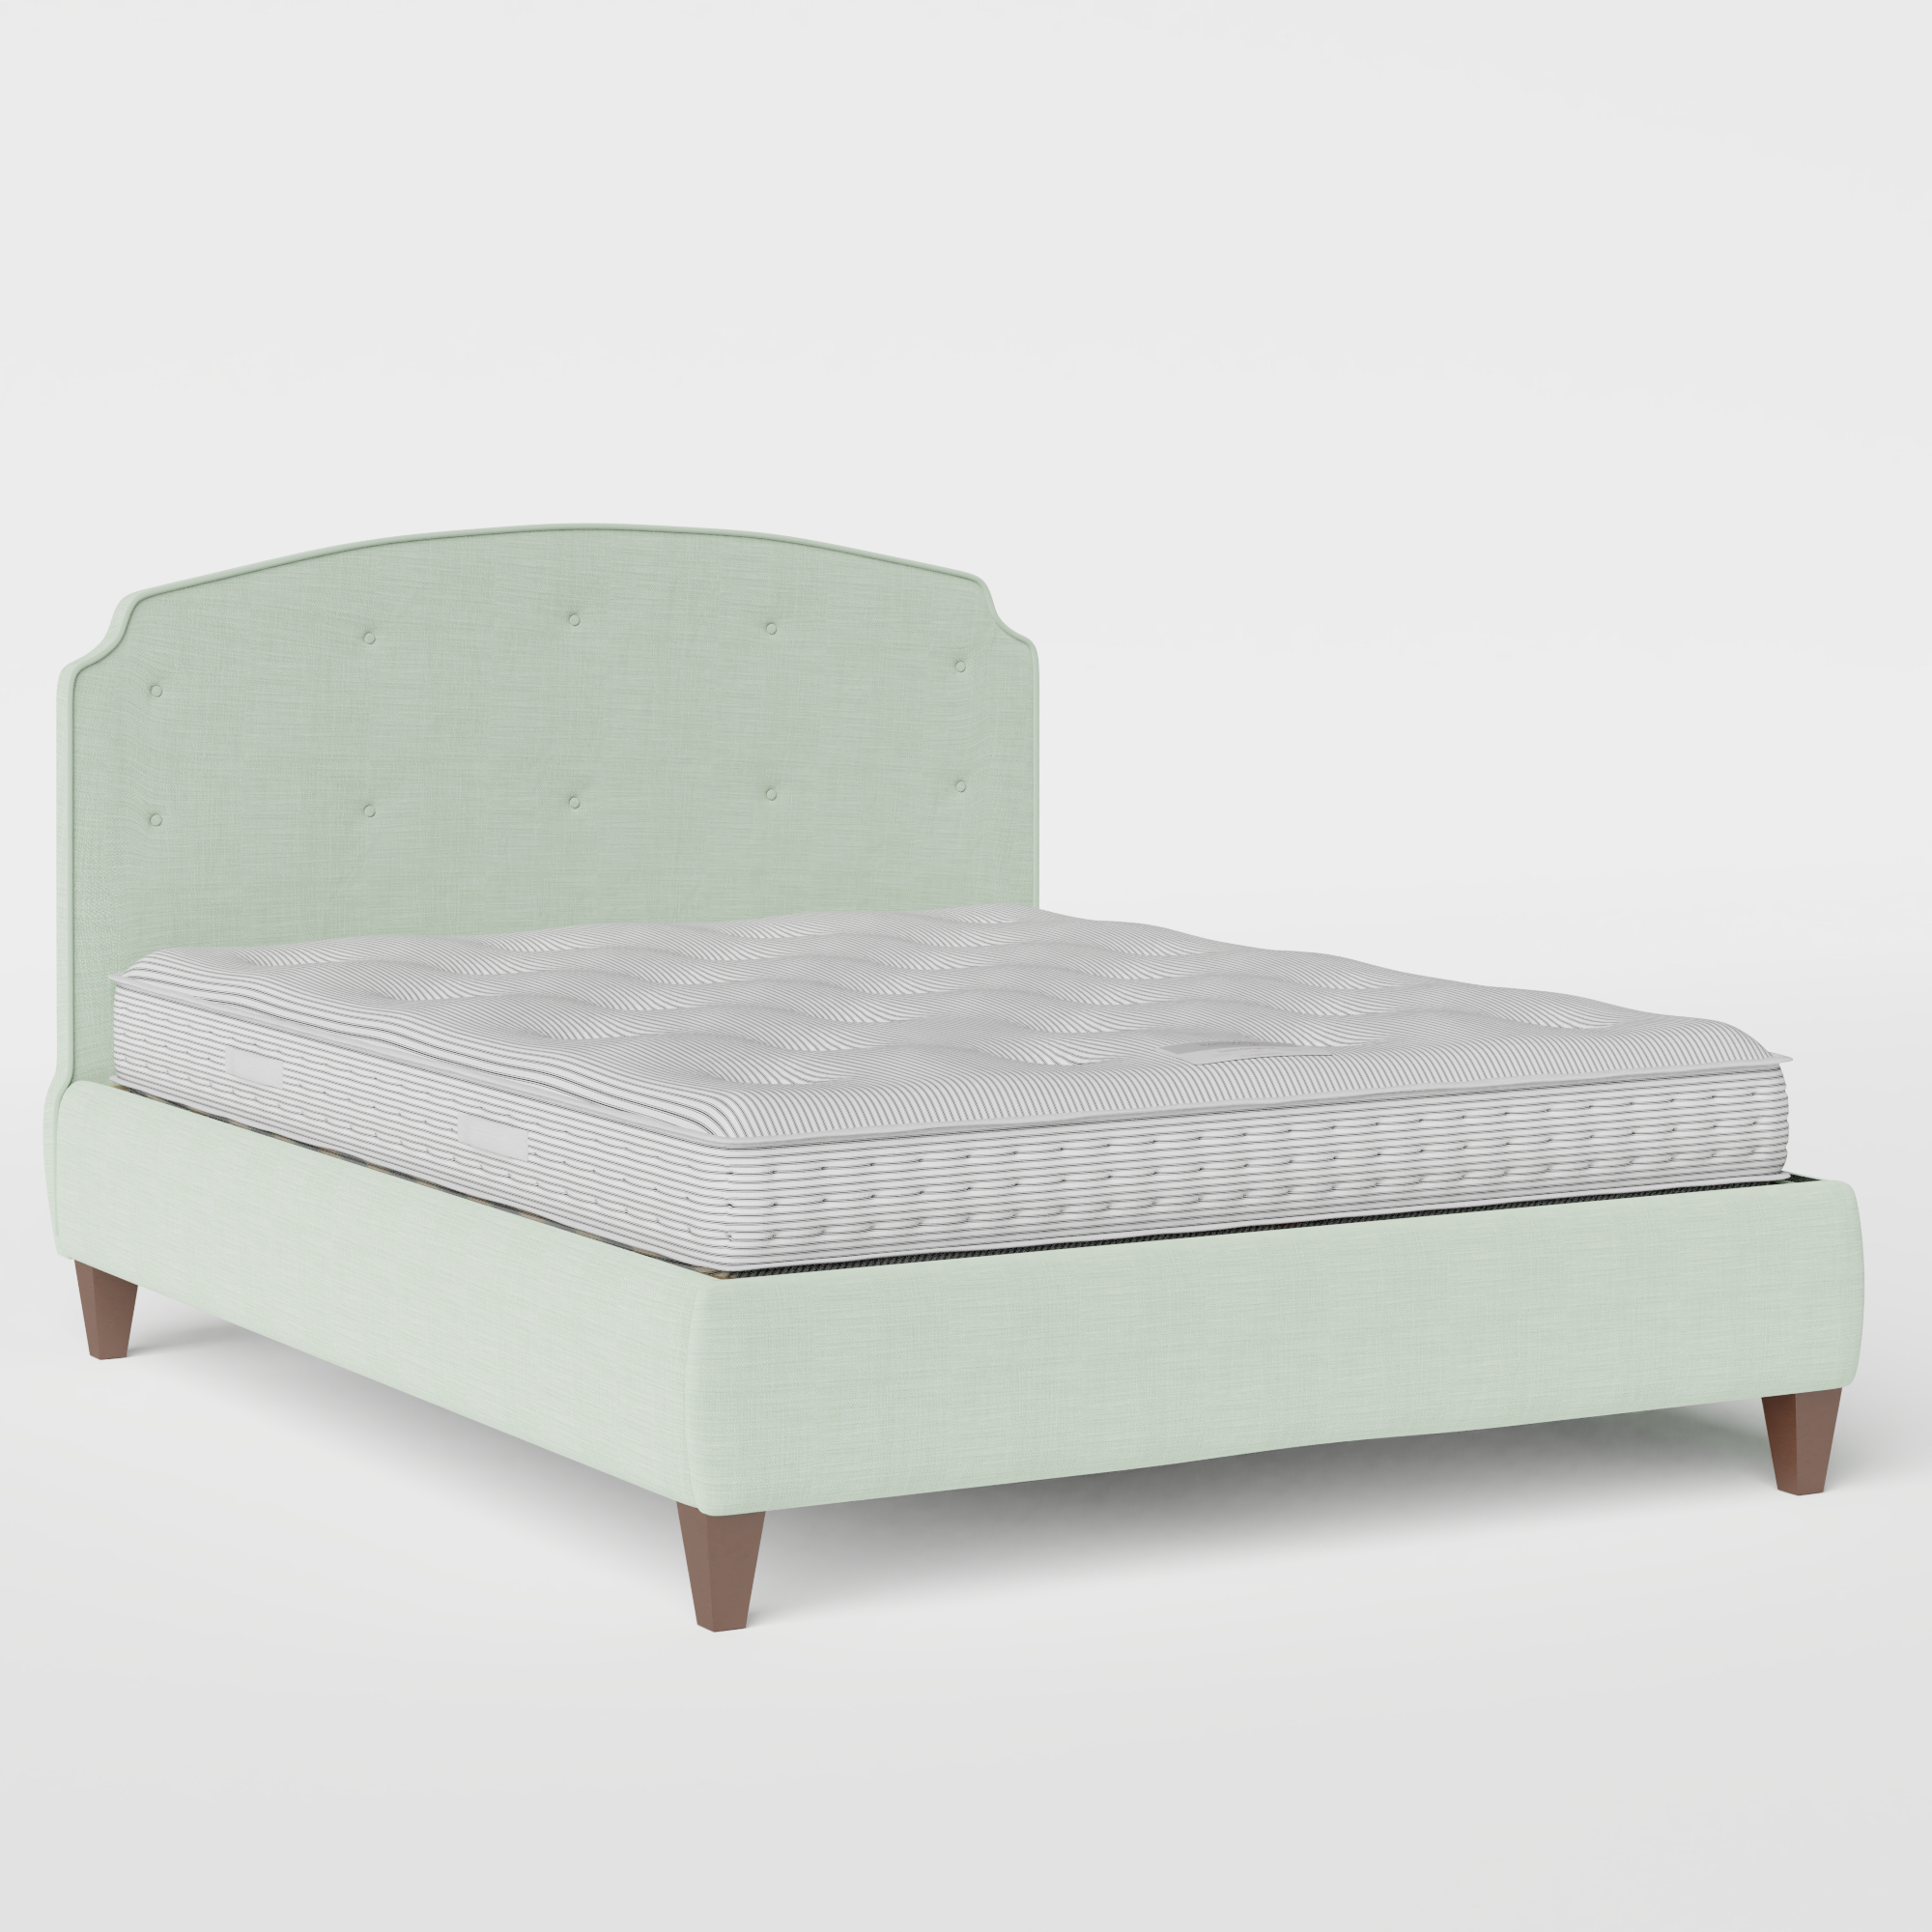 Lide Buttoned upholstered bed in duckegg fabric